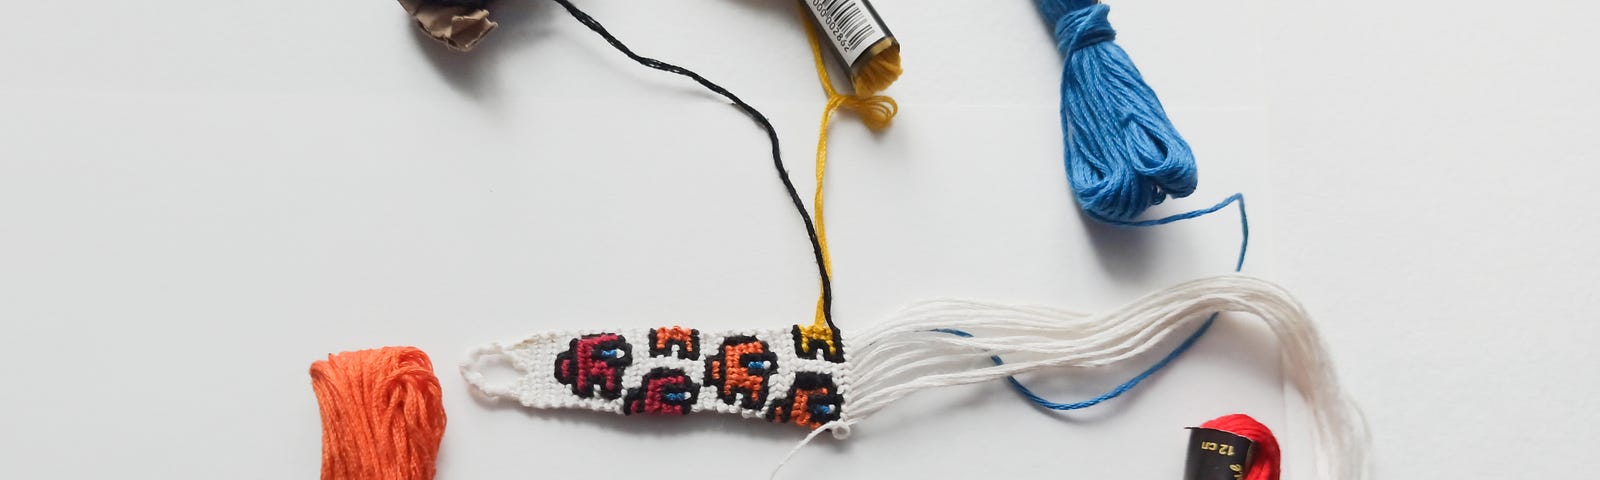 A hand knotted bracelet in progress, with different colored cords on white background